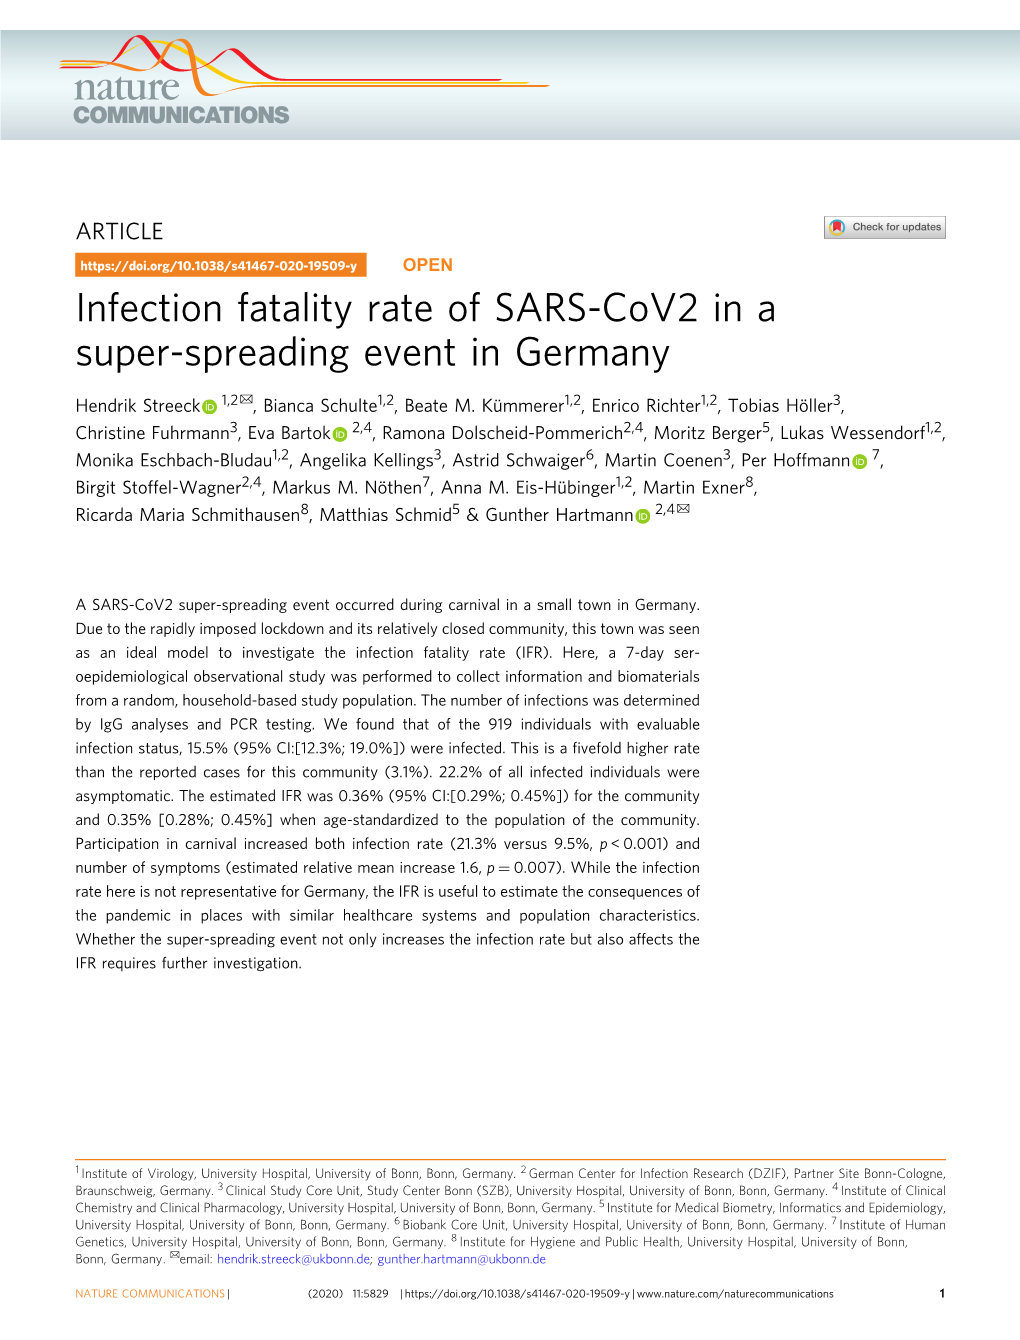 Infection Fatality Rate of SARS-Cov2 in a Super-Spreading Event in Germany ✉ Hendrik Streeck 1,2 , Bianca Schulte1,2, Beate M